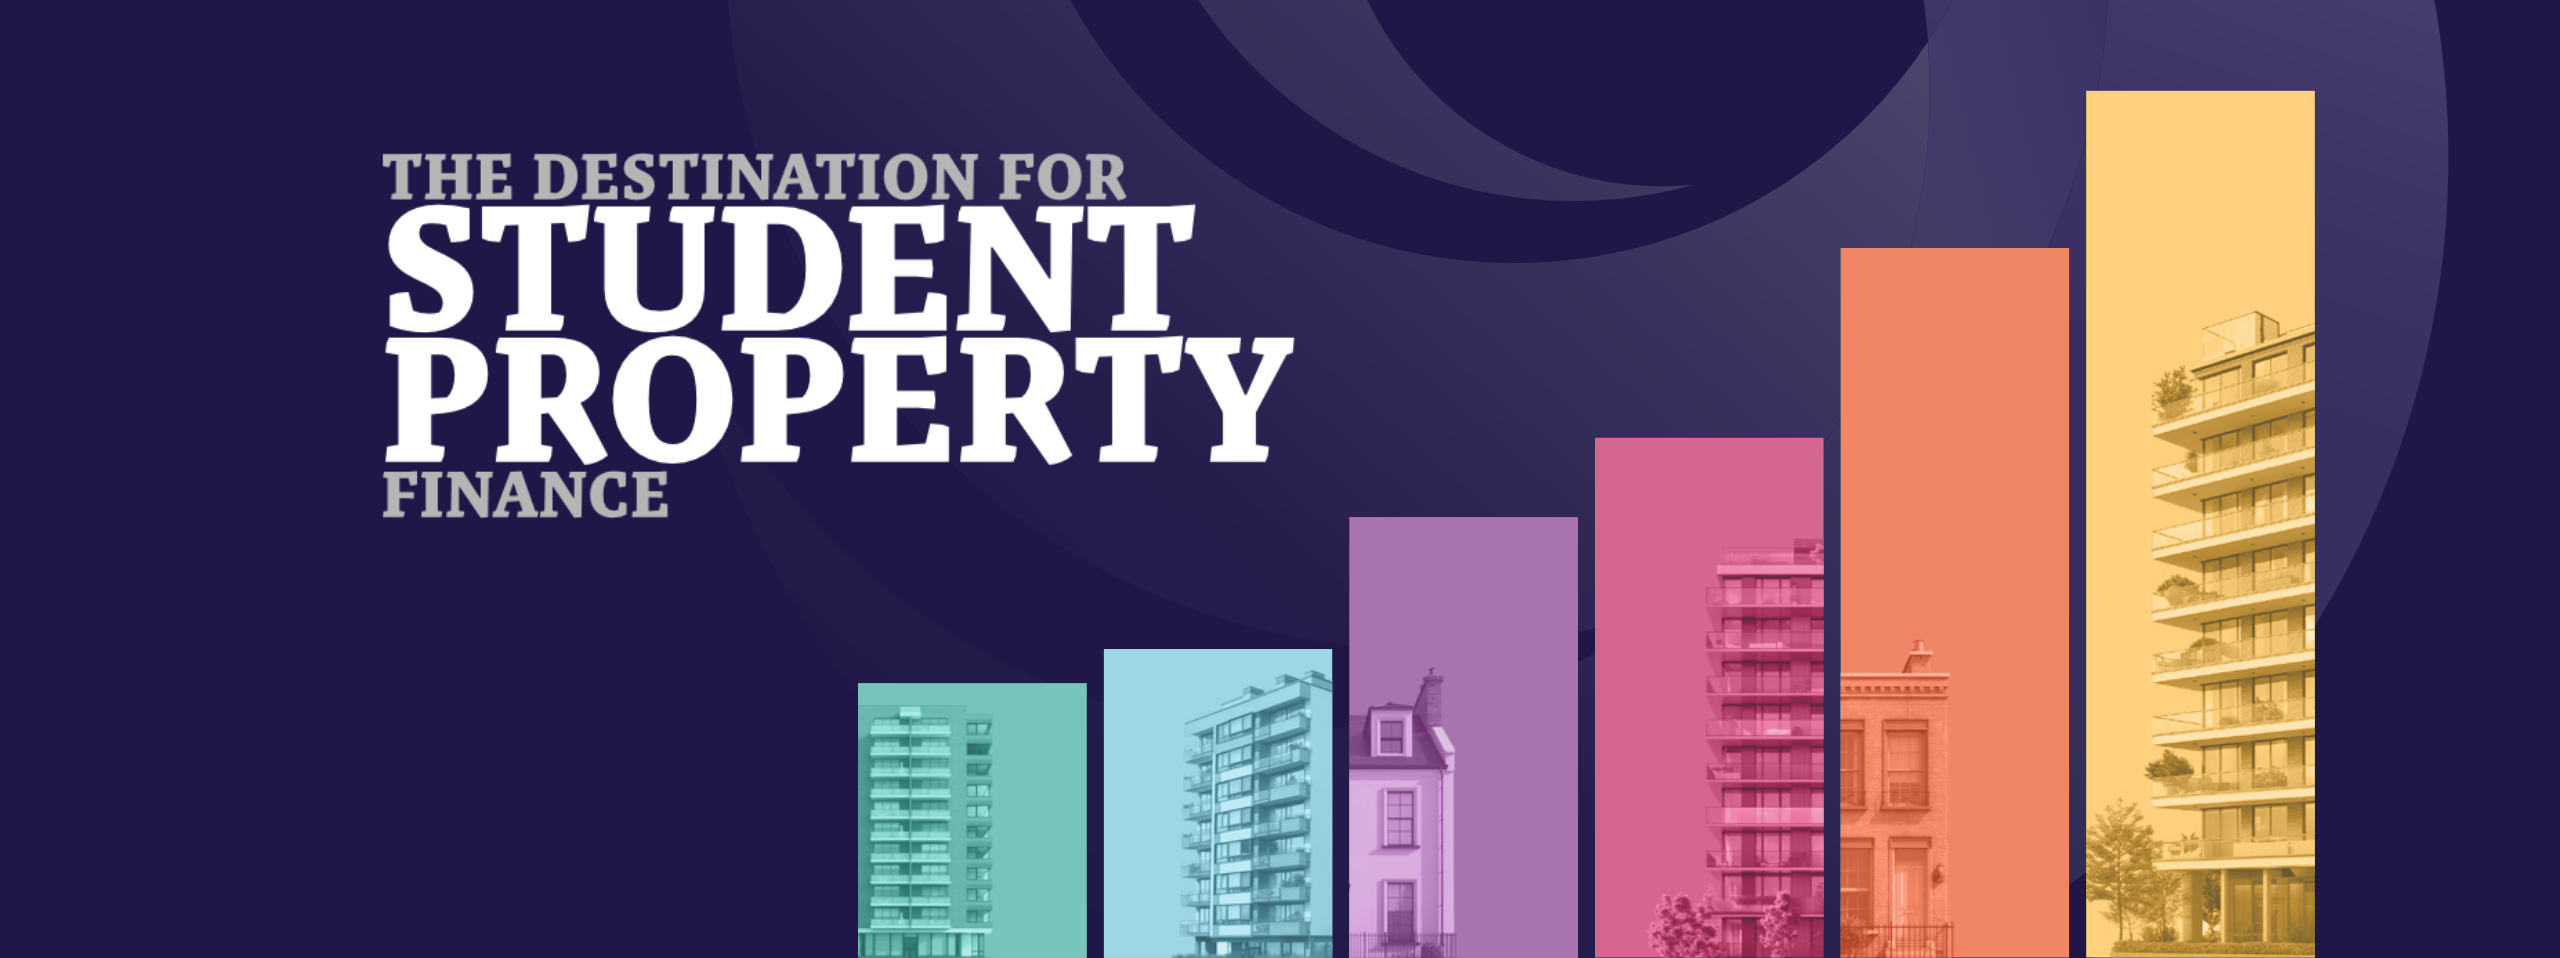 The destination for student property finance in text, next to a colourful graph